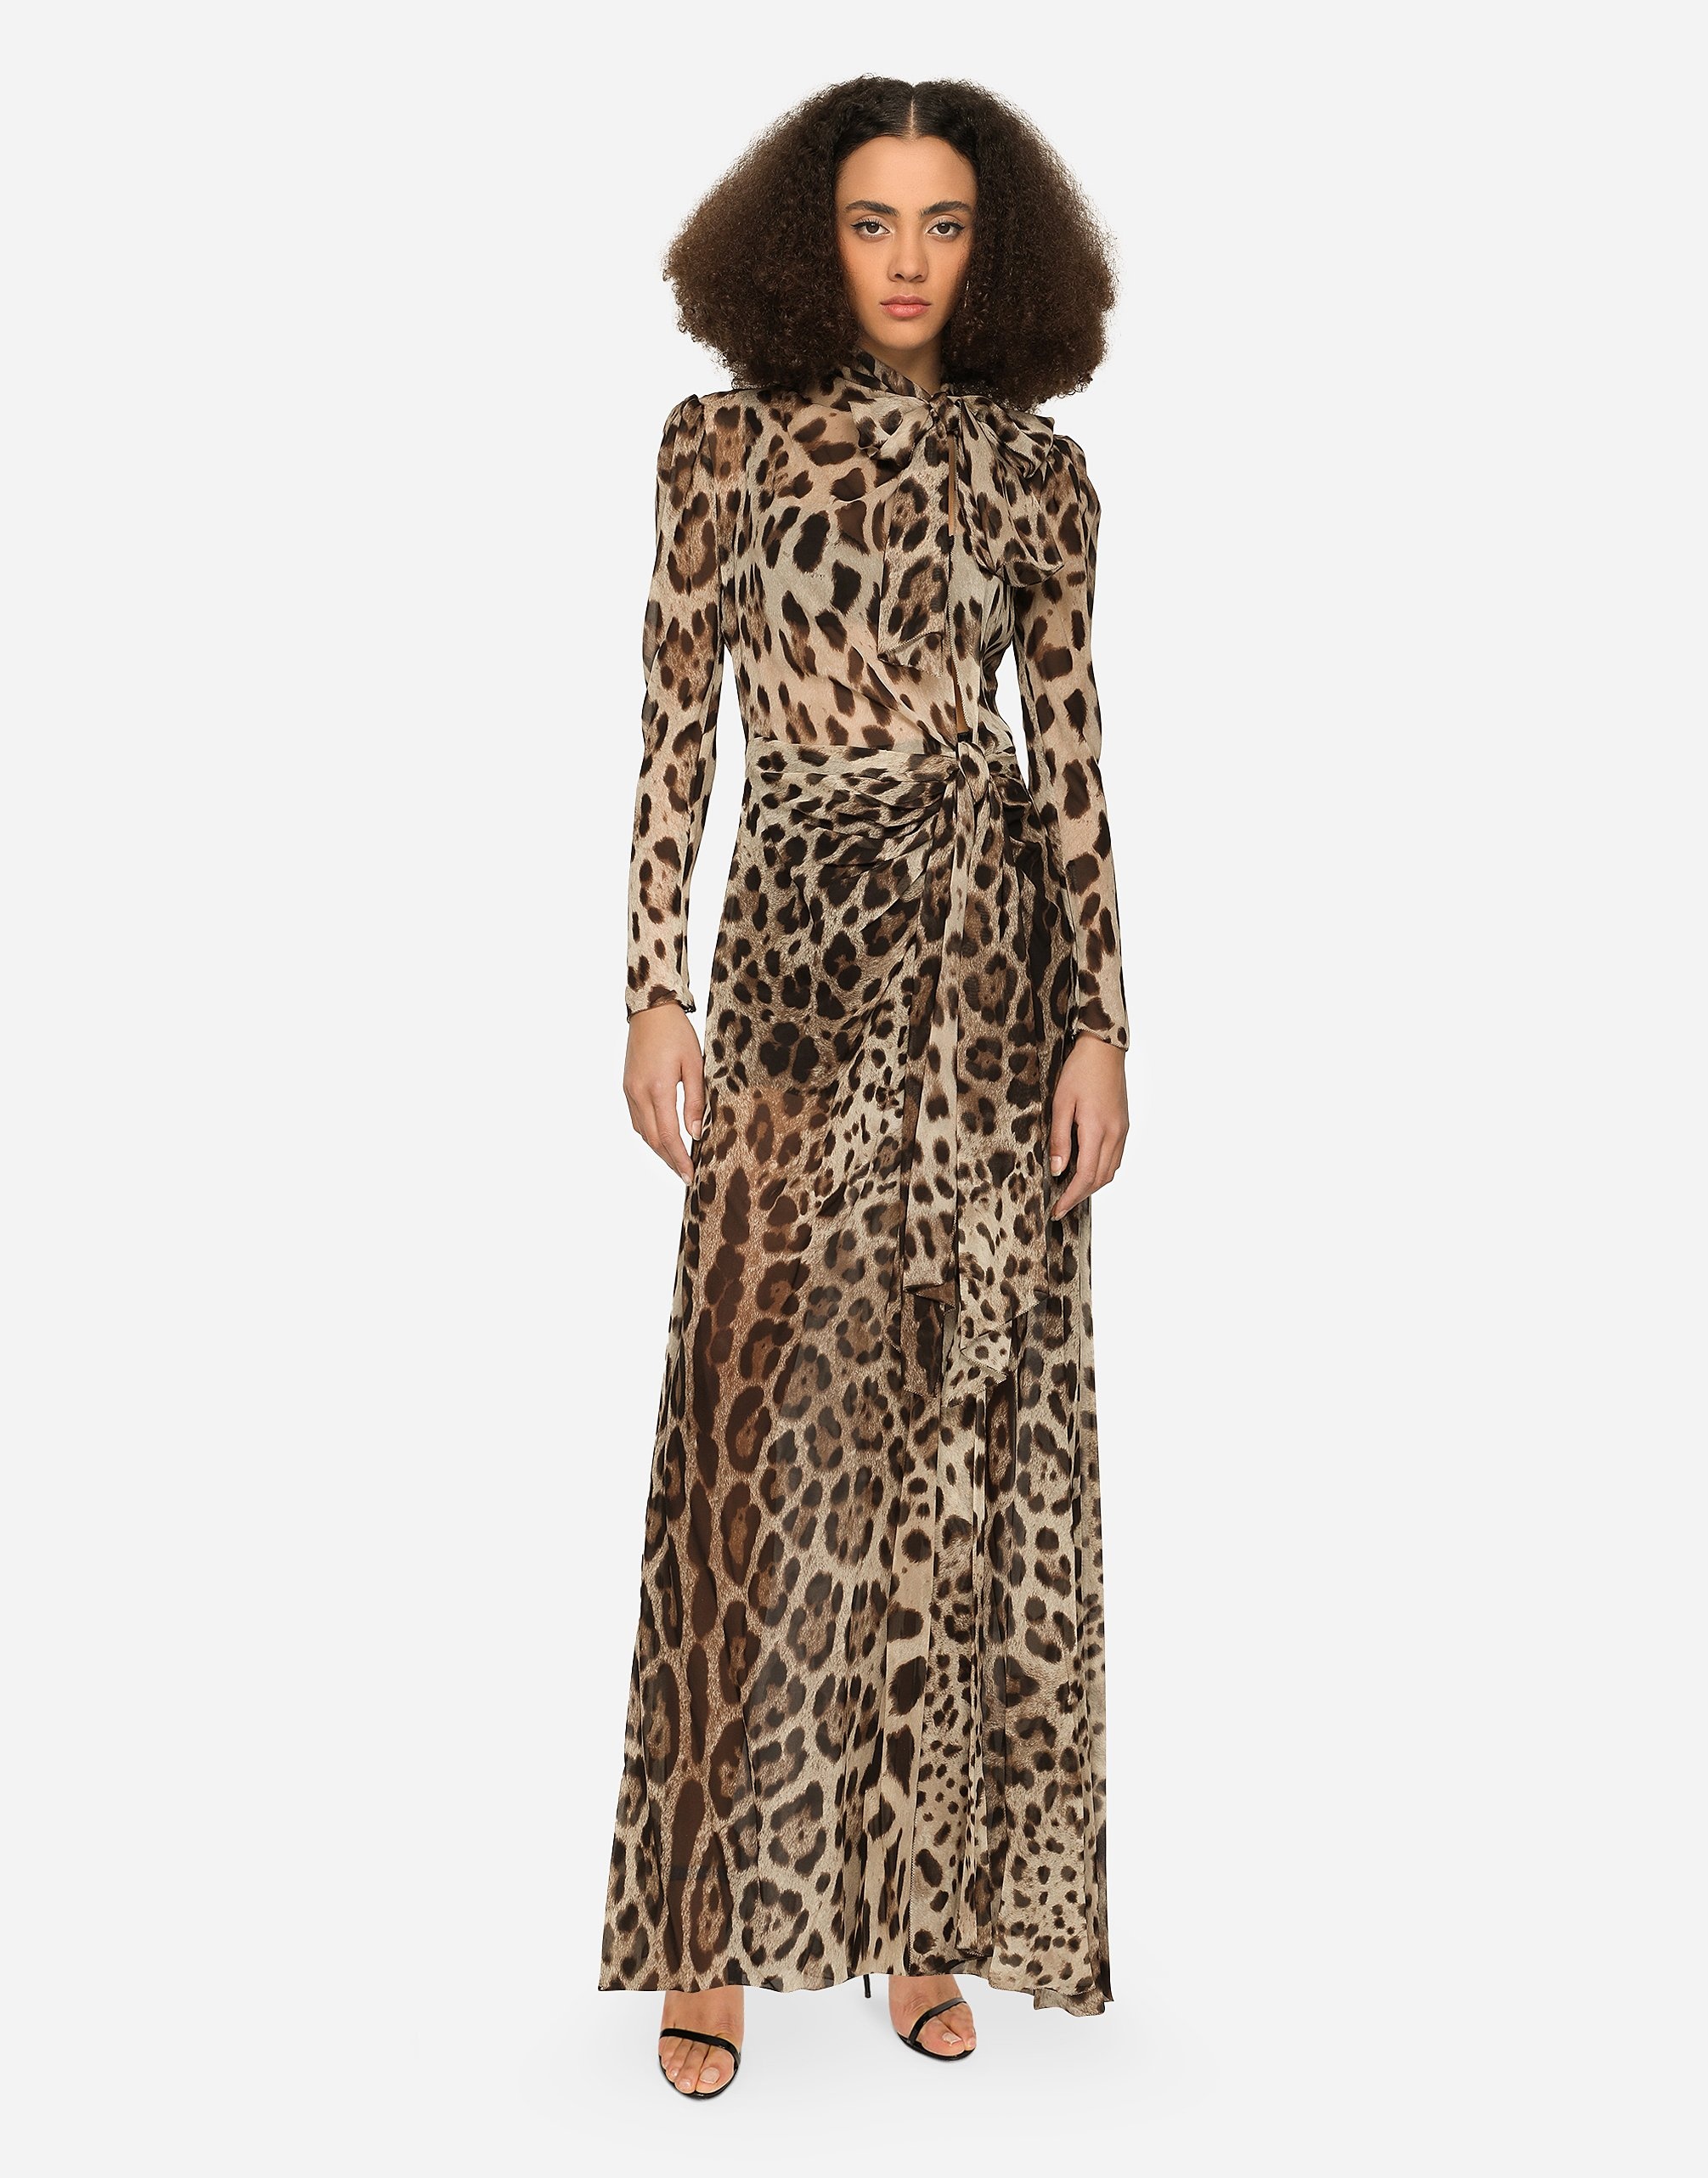 Georgette dress with leopard print and tie details - 2